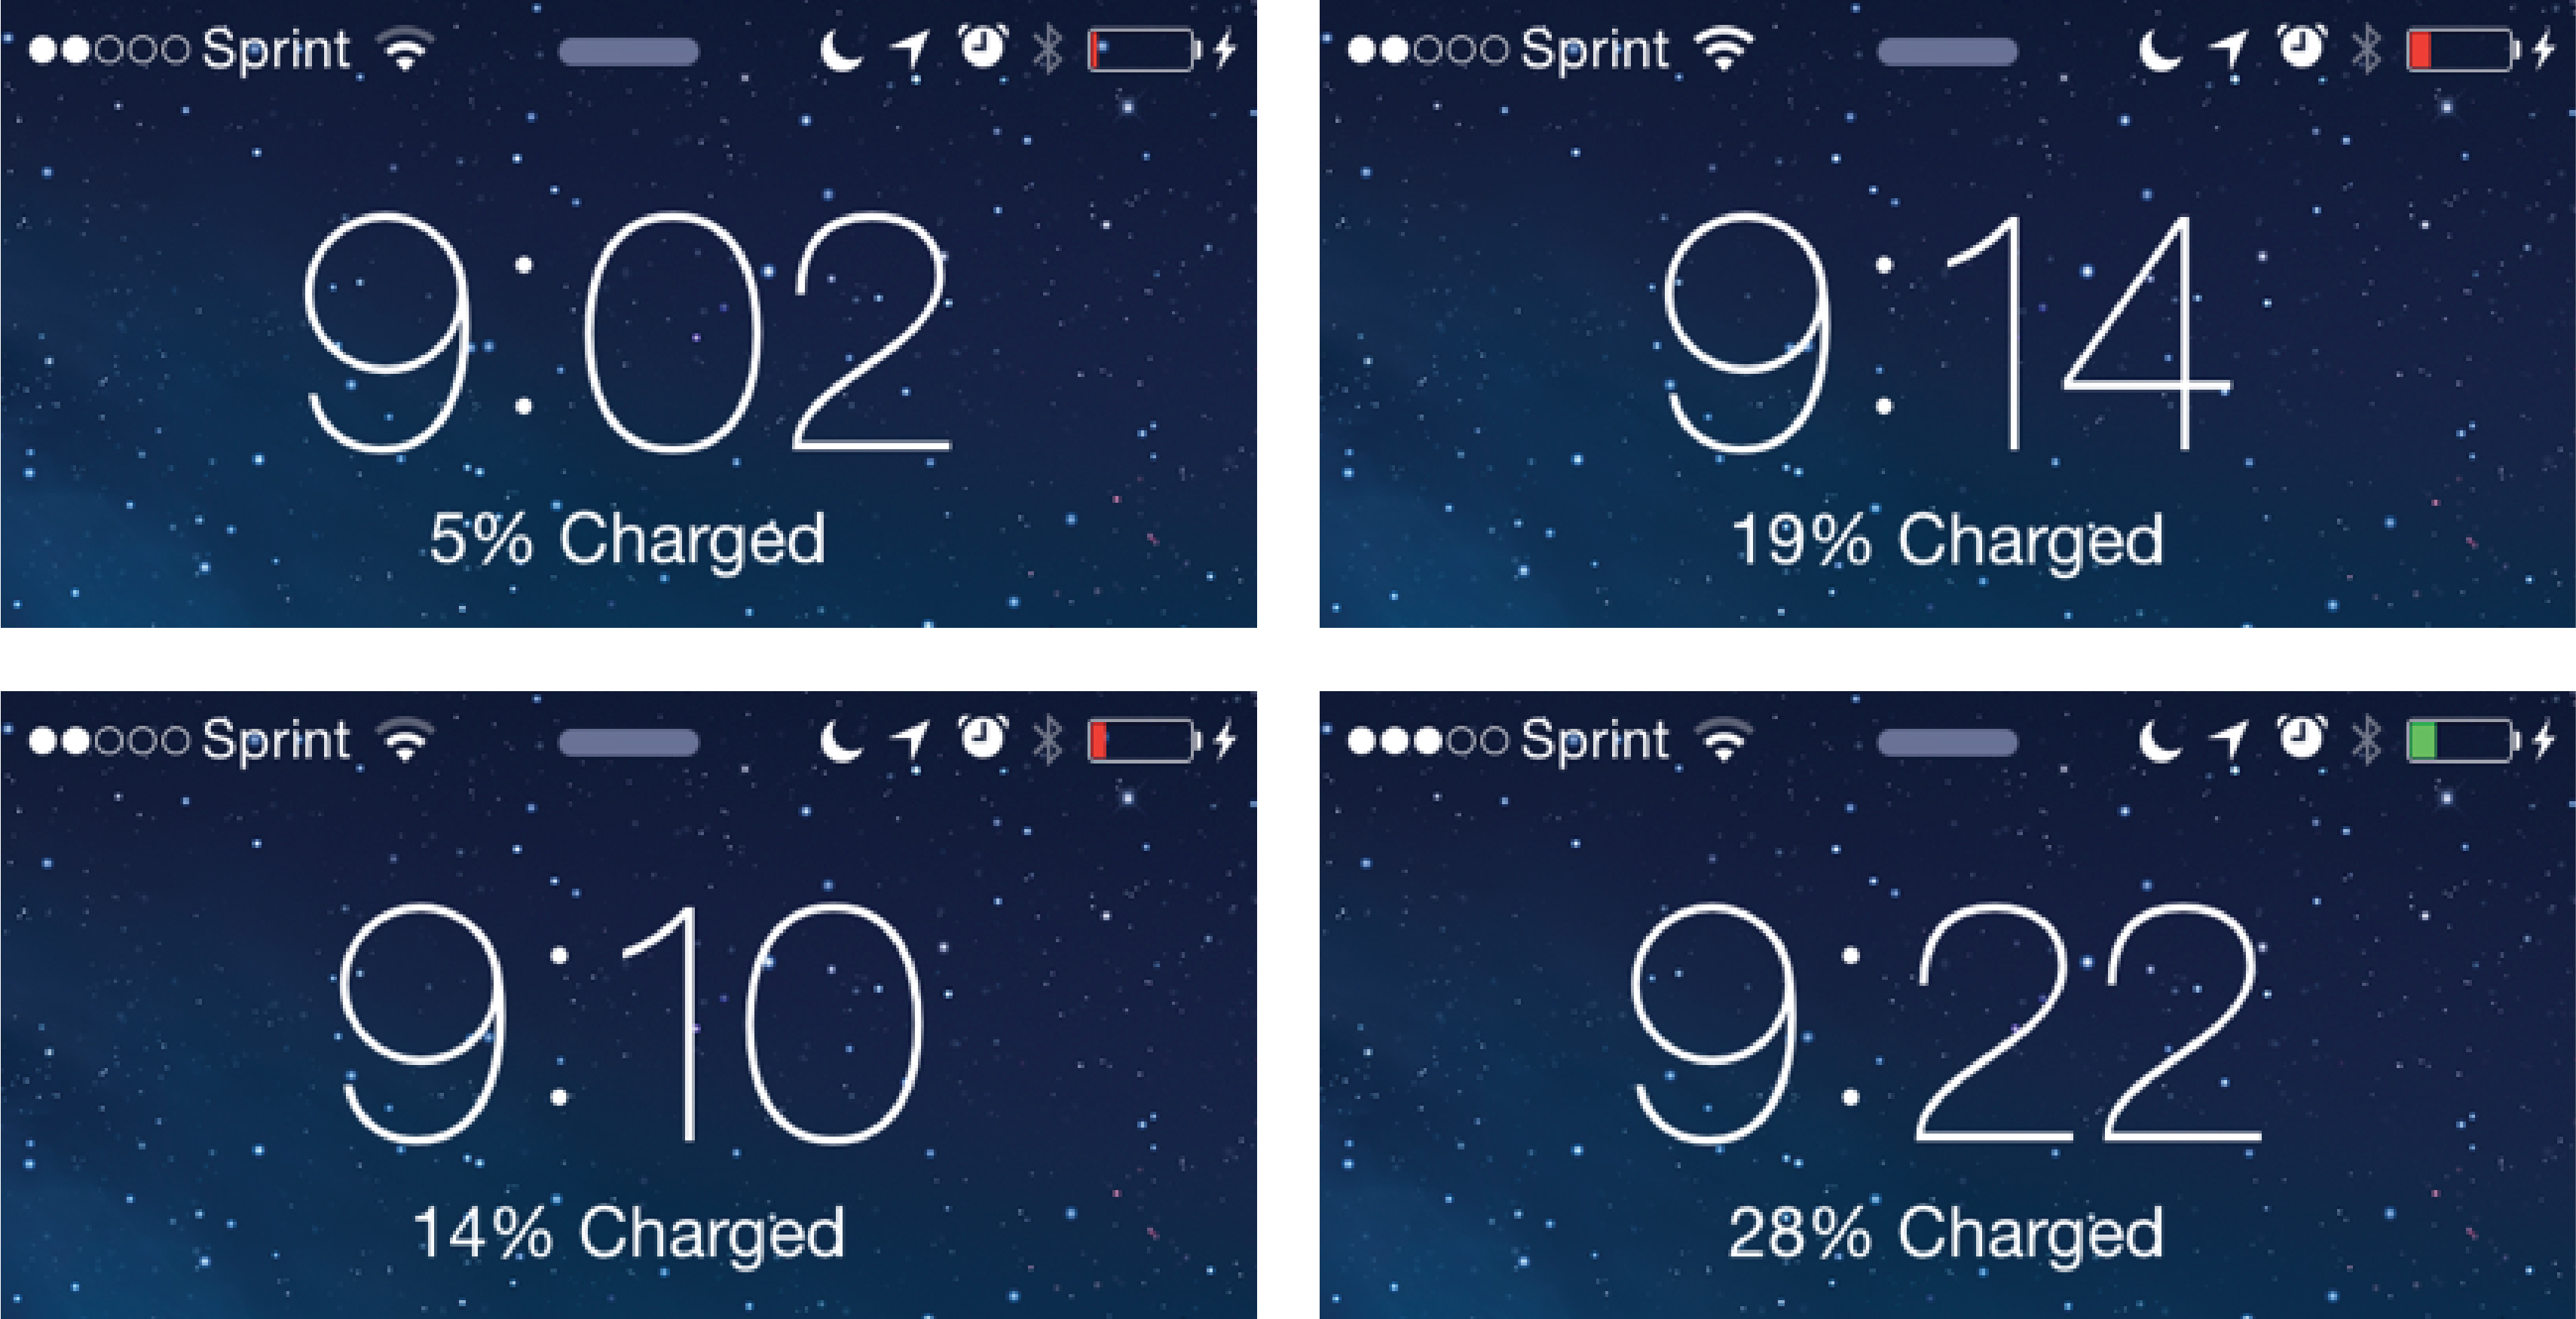 Four screenshots, each showing a timestamp and charge percentage. At 9:02, 5% charged. At 9:10, 14% charged. At 9:14, 19% charged. At 9:22, 28% charged.